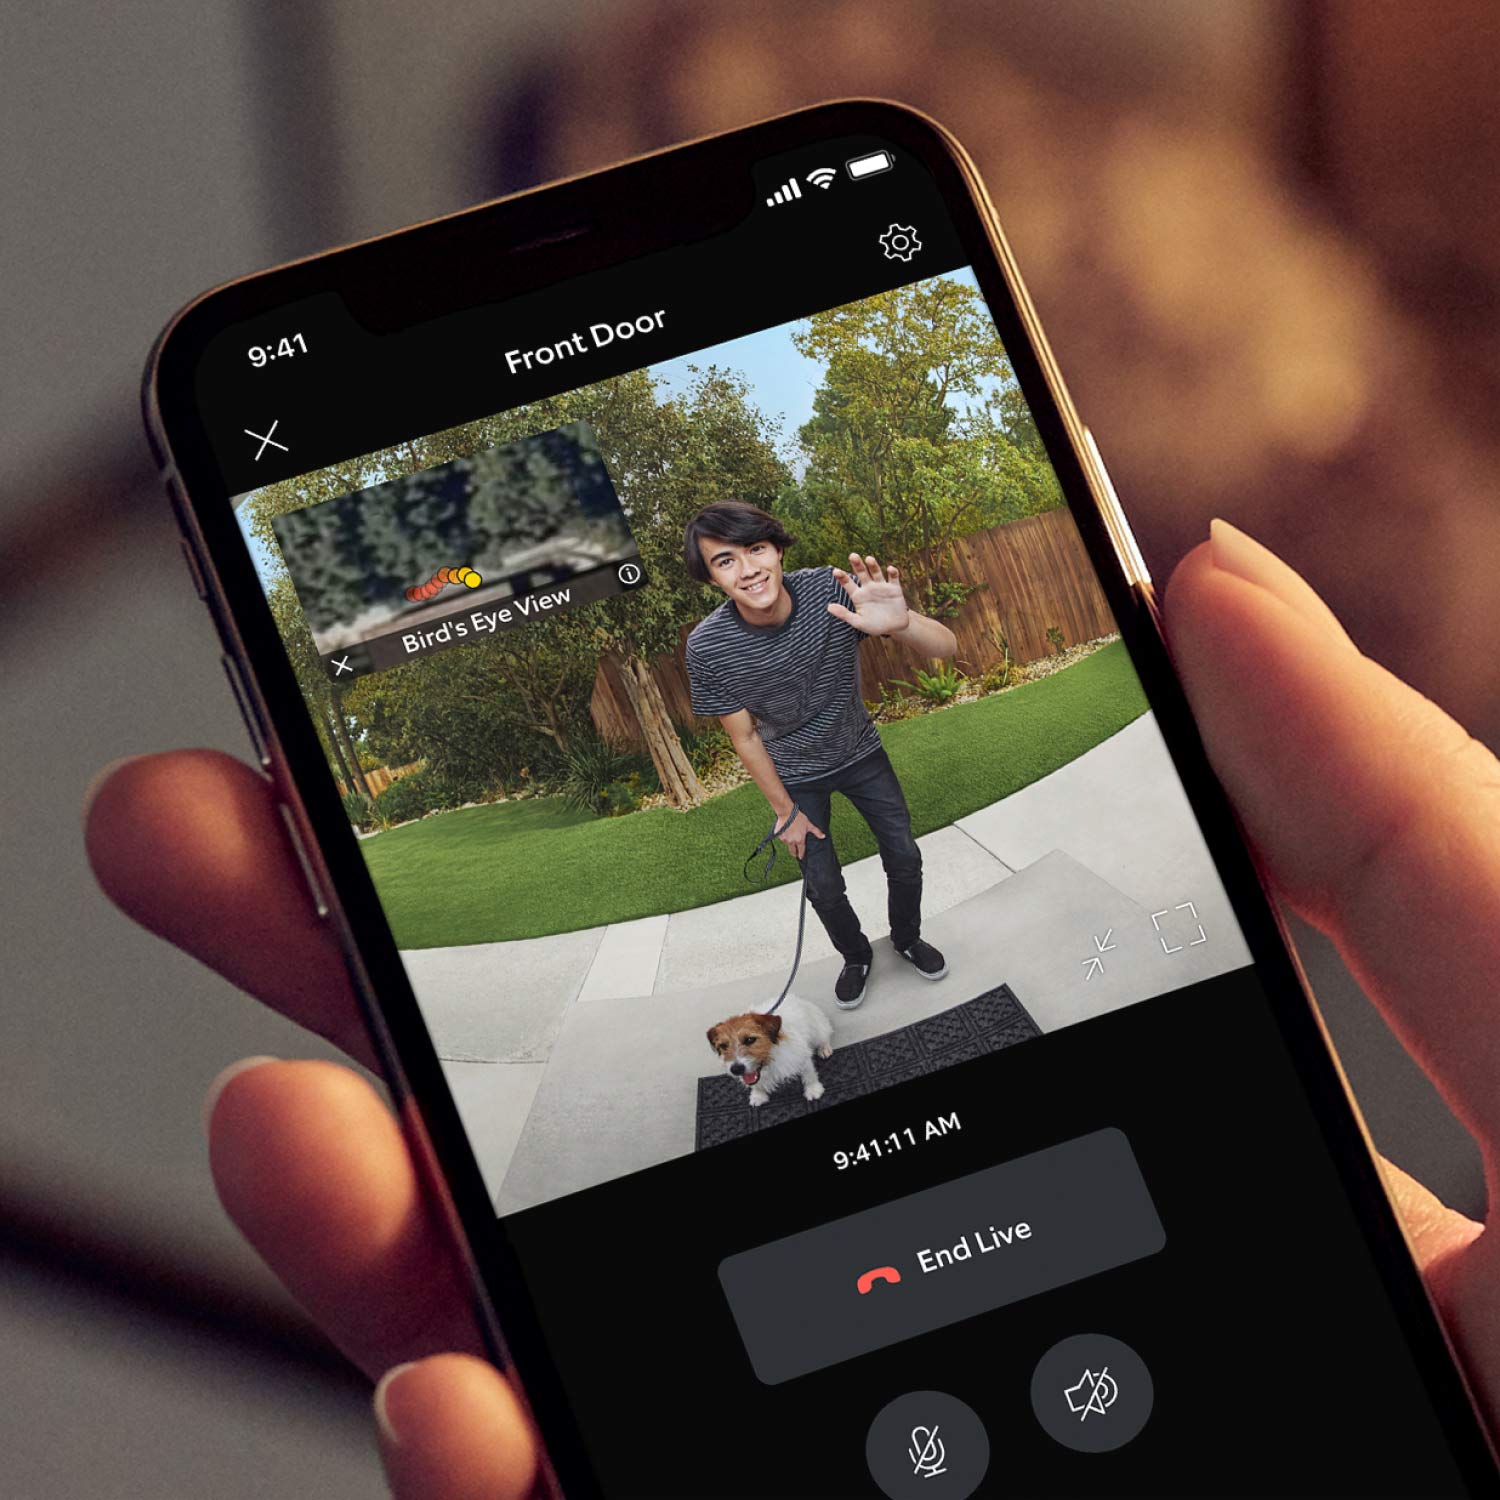 Wired Doorbell Pro (Formerly: Video Doorbell Pro 2) - Close-up of hand holding smartphone, video shows smiling man with a dog. Inset is bird's eye view perspective.